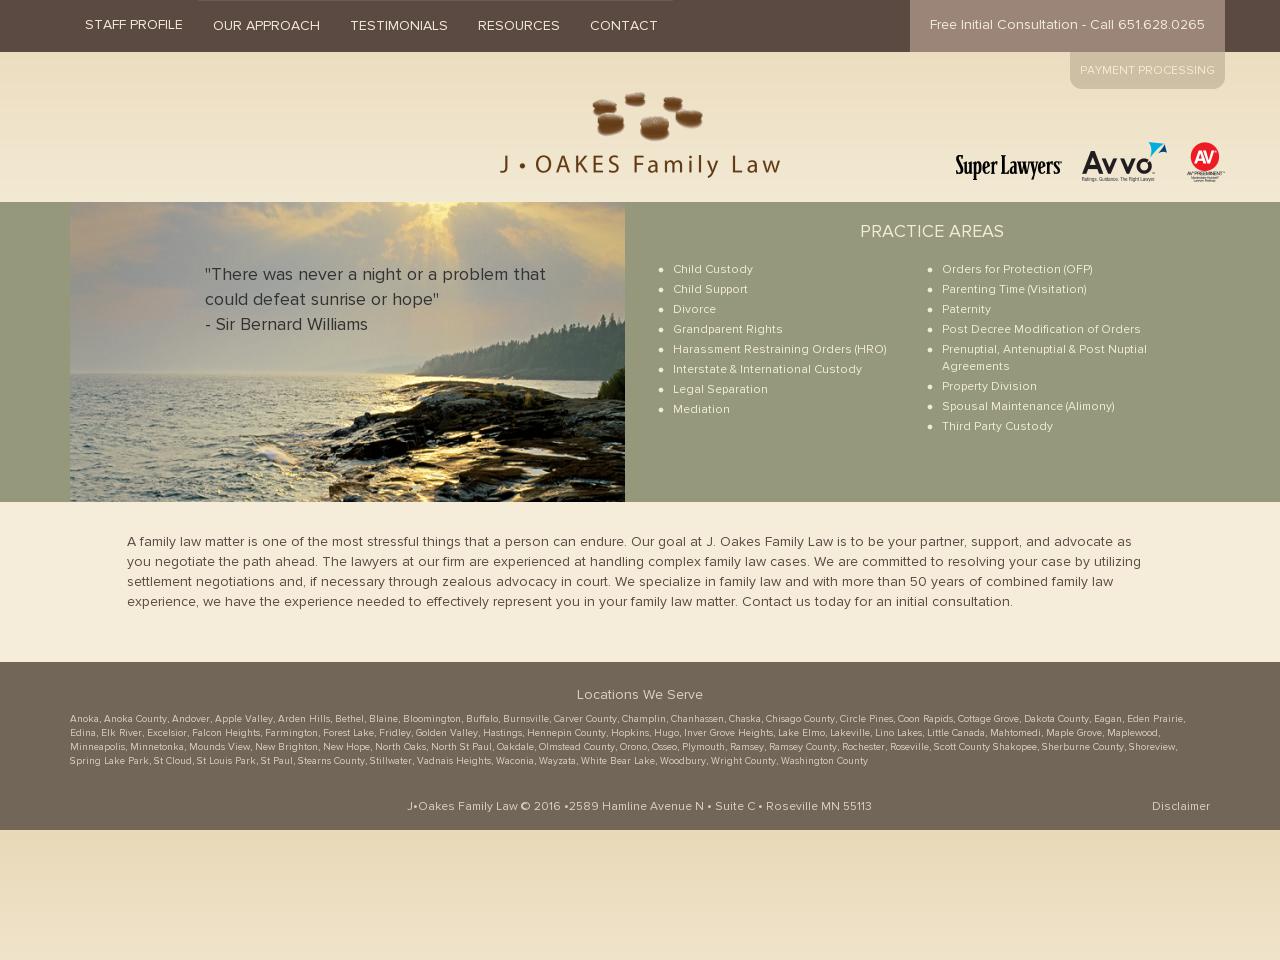 J. Oakes Family Law - Roseville MN Lawyers